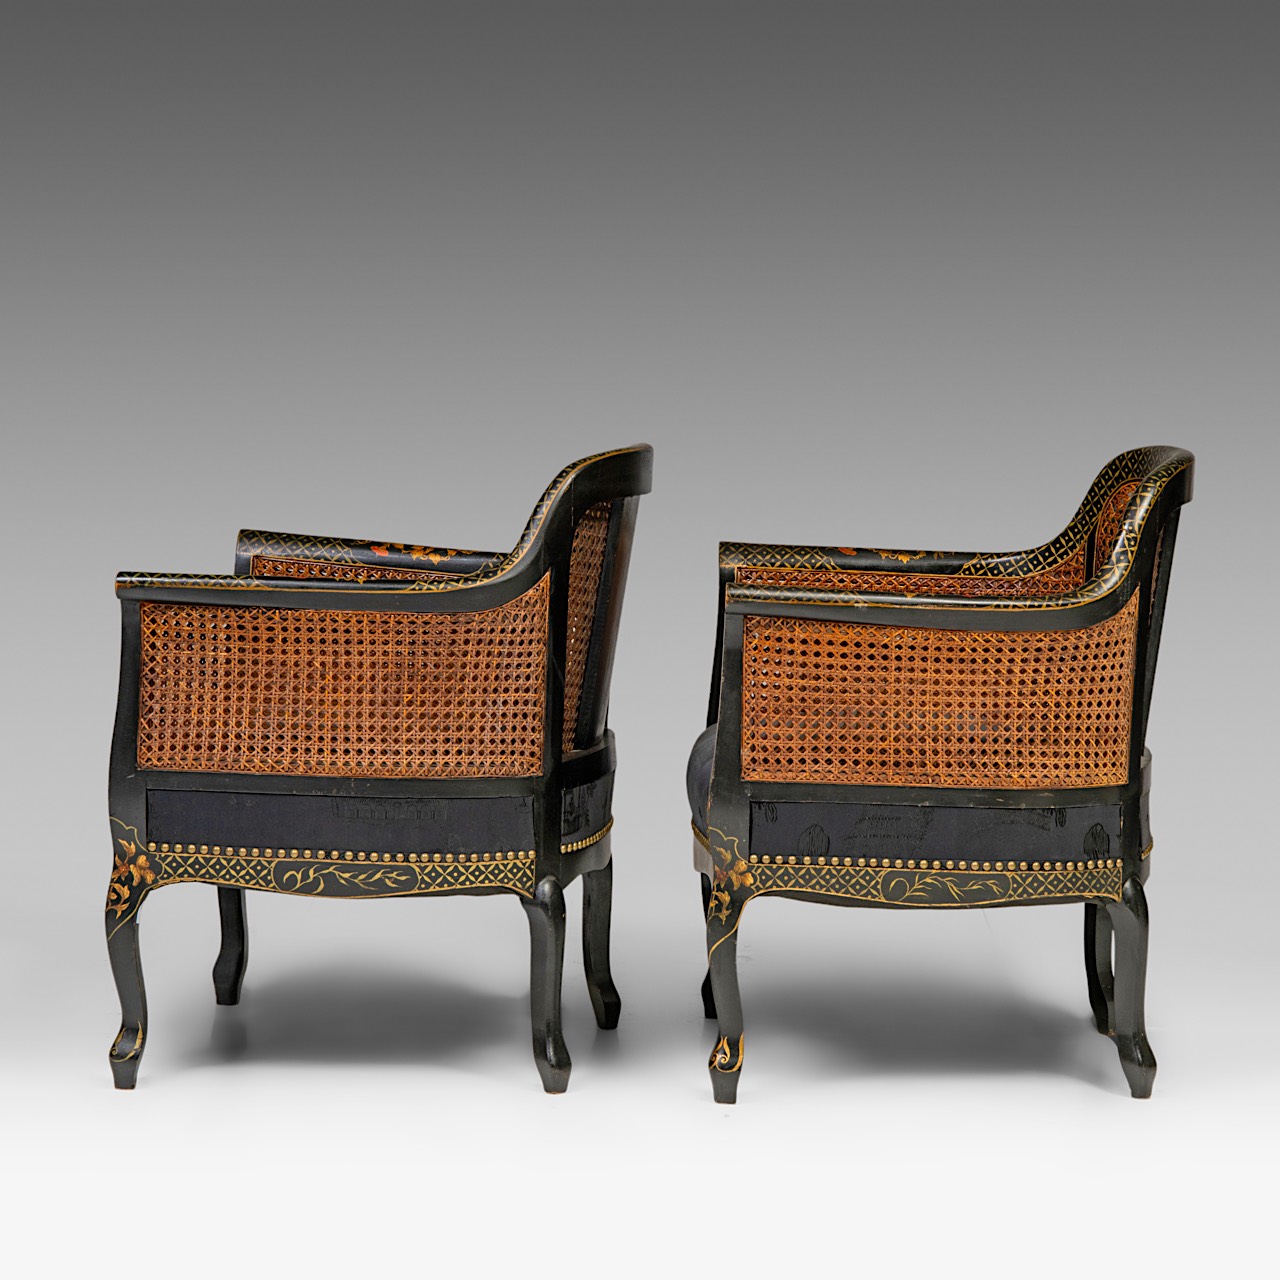 Two sets of handpainted Japonisme armchairs, with wicker panels, signed, H total 84 cm - H seat 36 c - Image 8 of 12